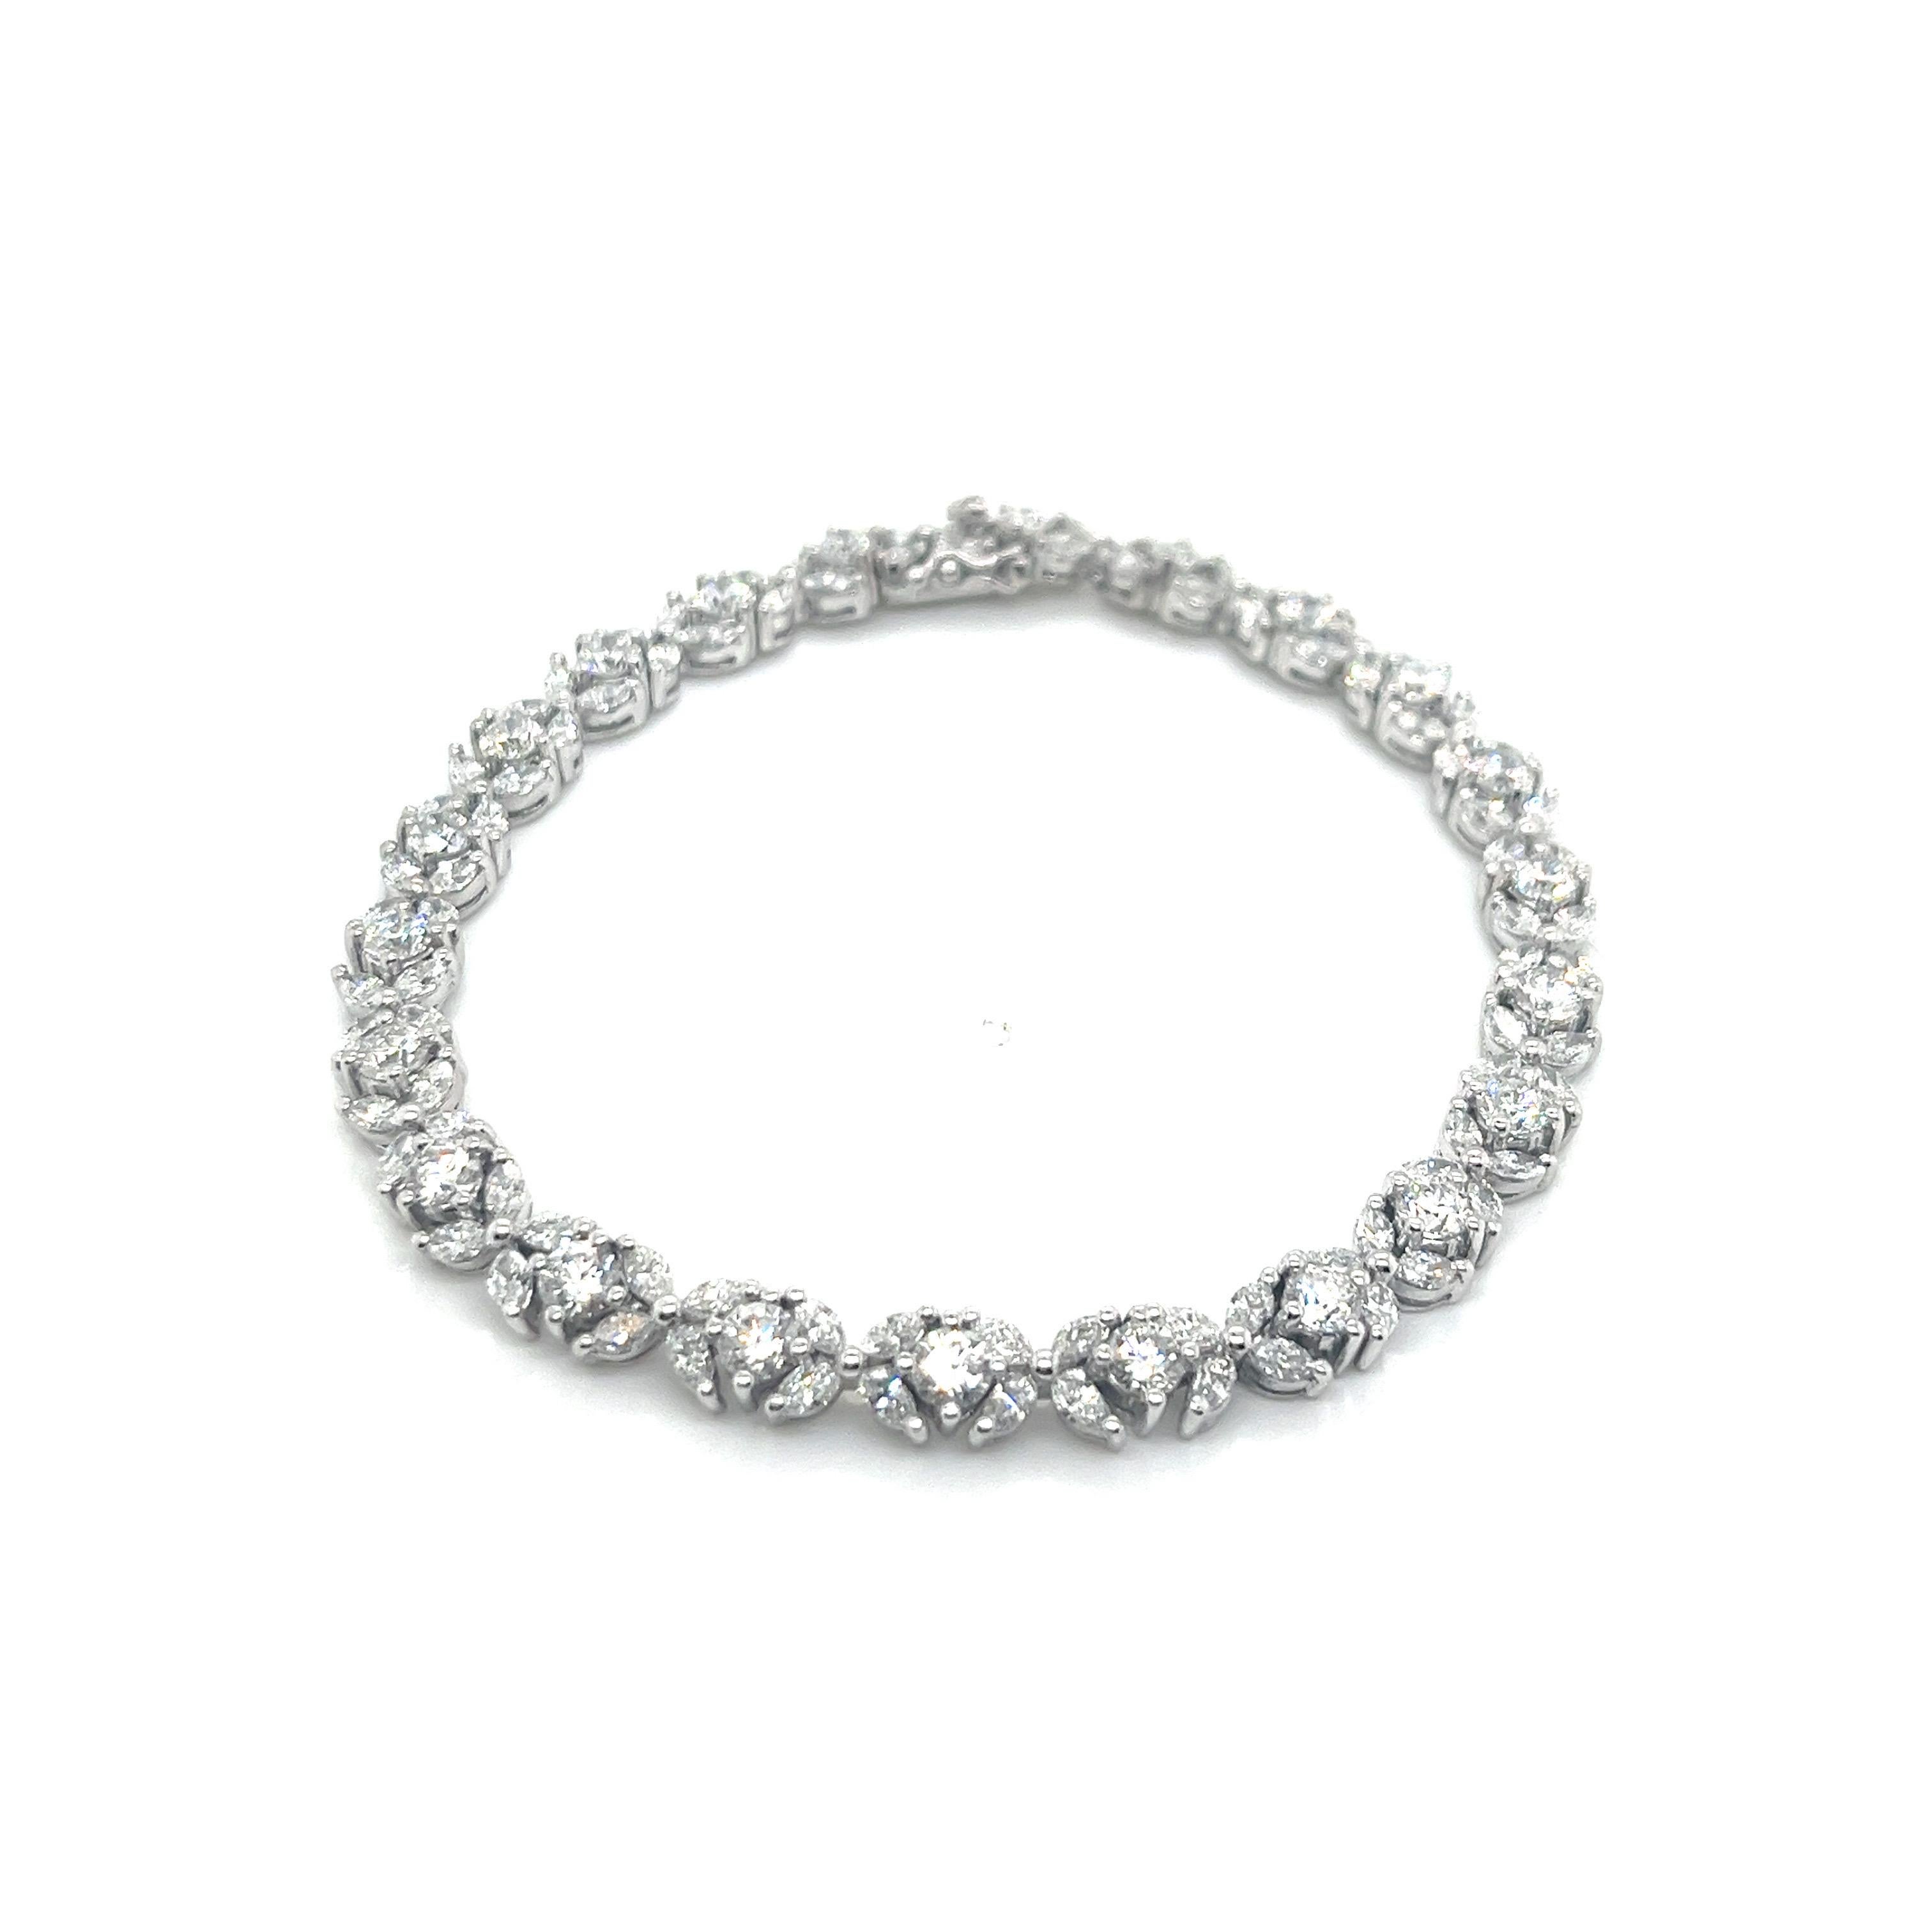 This exquisite vintage bracelet is a true masterpiece of platinum and diamond artistry. Featuring an elegant alternating design of marquise and round brilliant diamonds, it exudes timeless sophistication and glamour.

The bracelet is comprised of 22